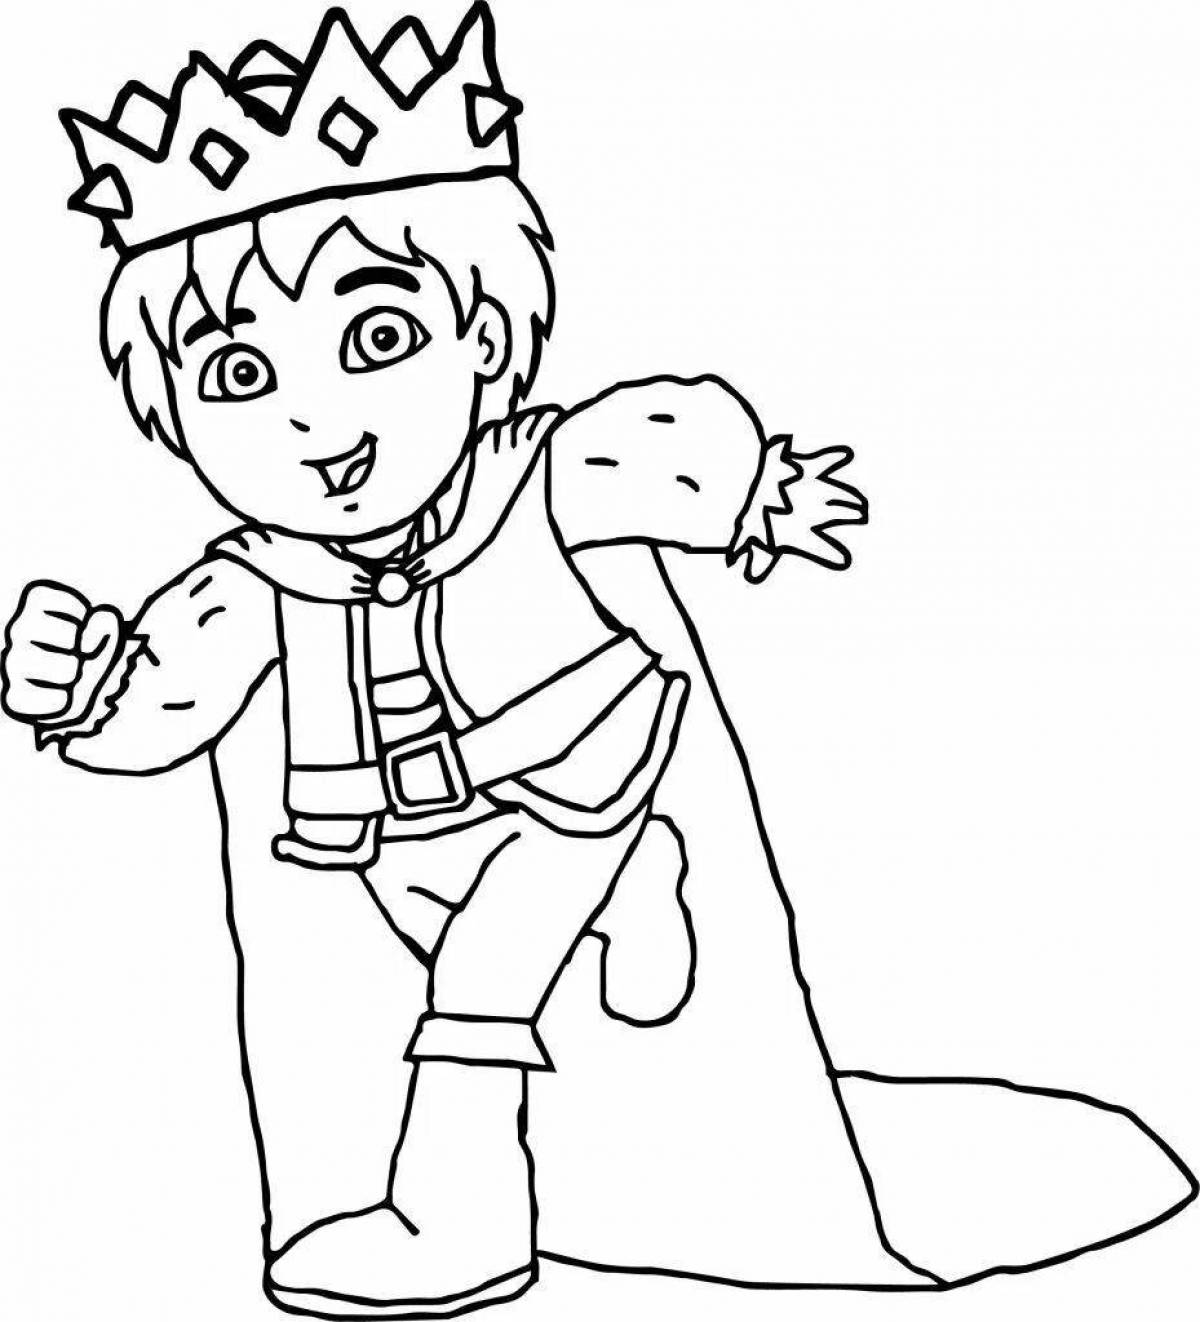 Diego's charming coloring book